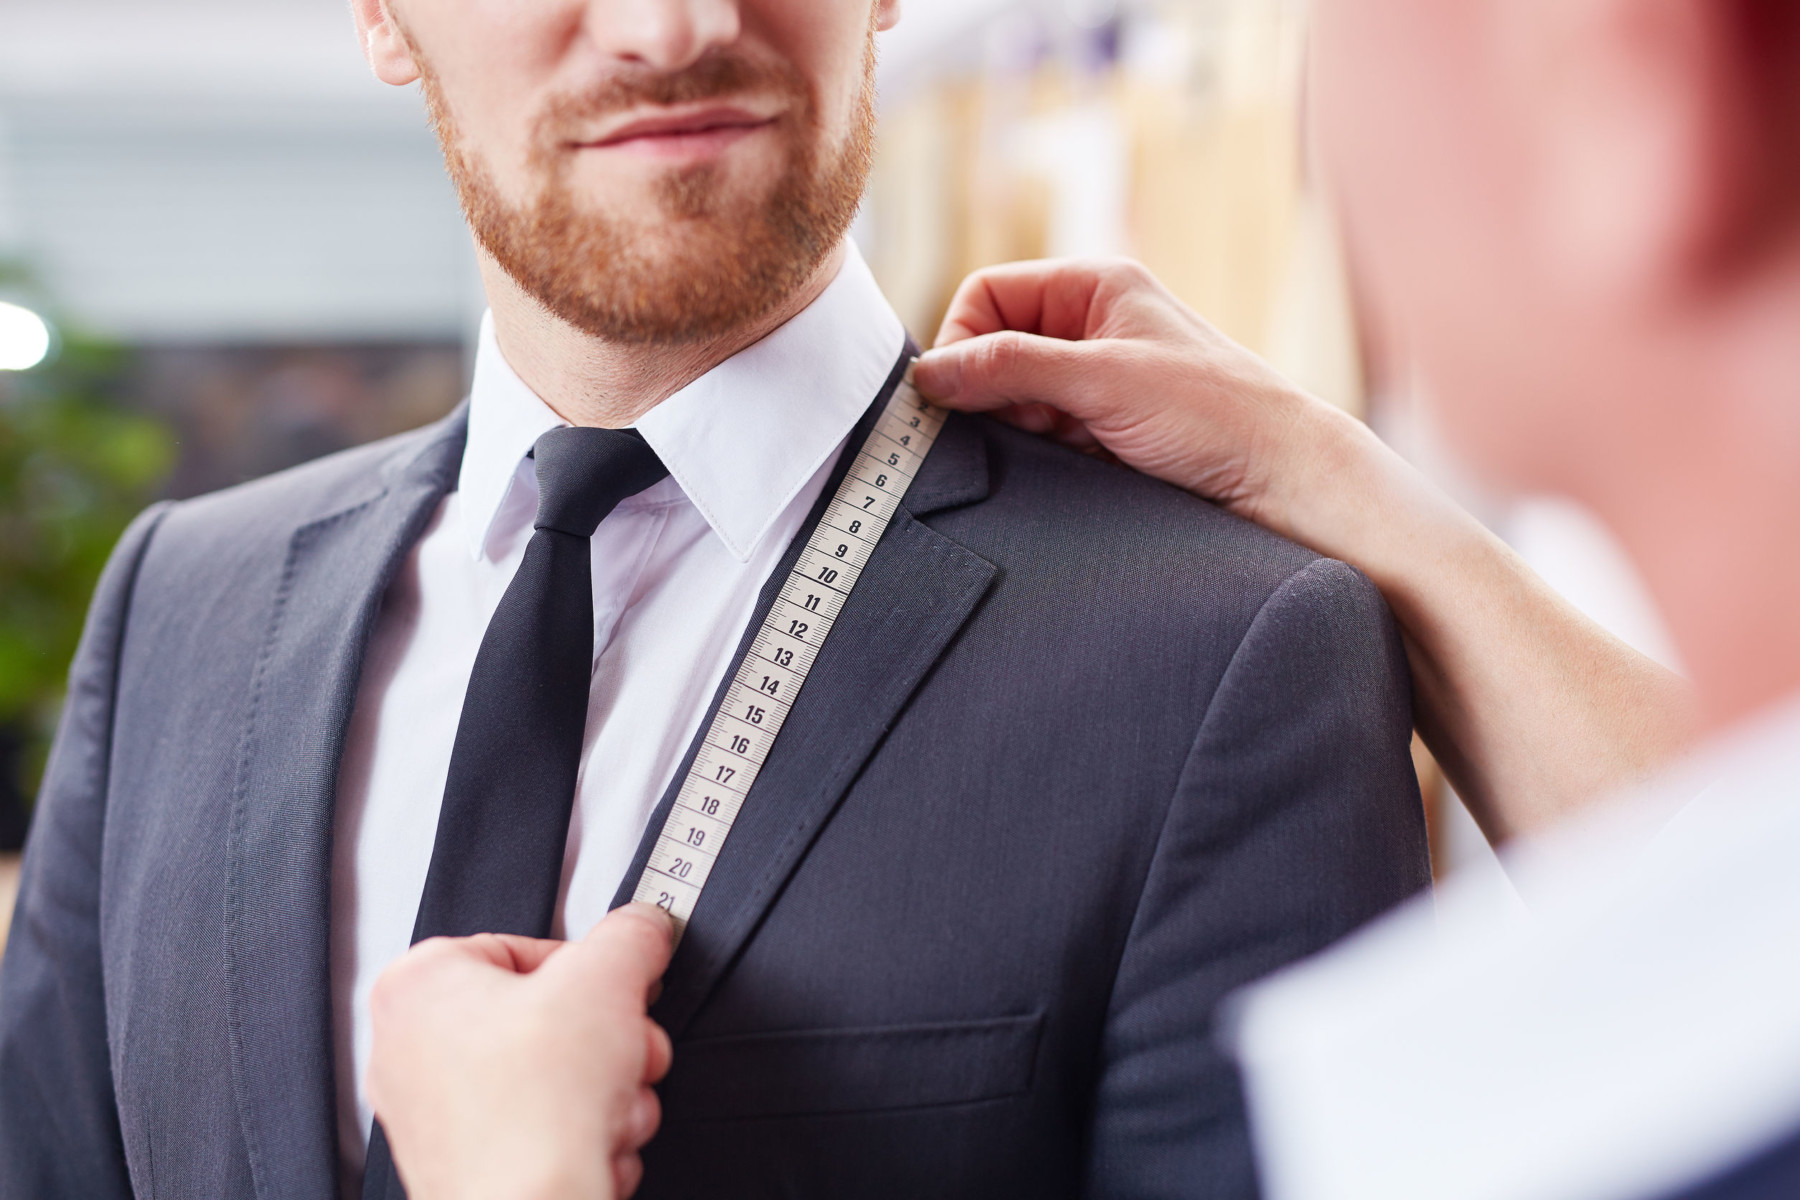 Made to Measure vs. Custom: Suit Up the Right Way